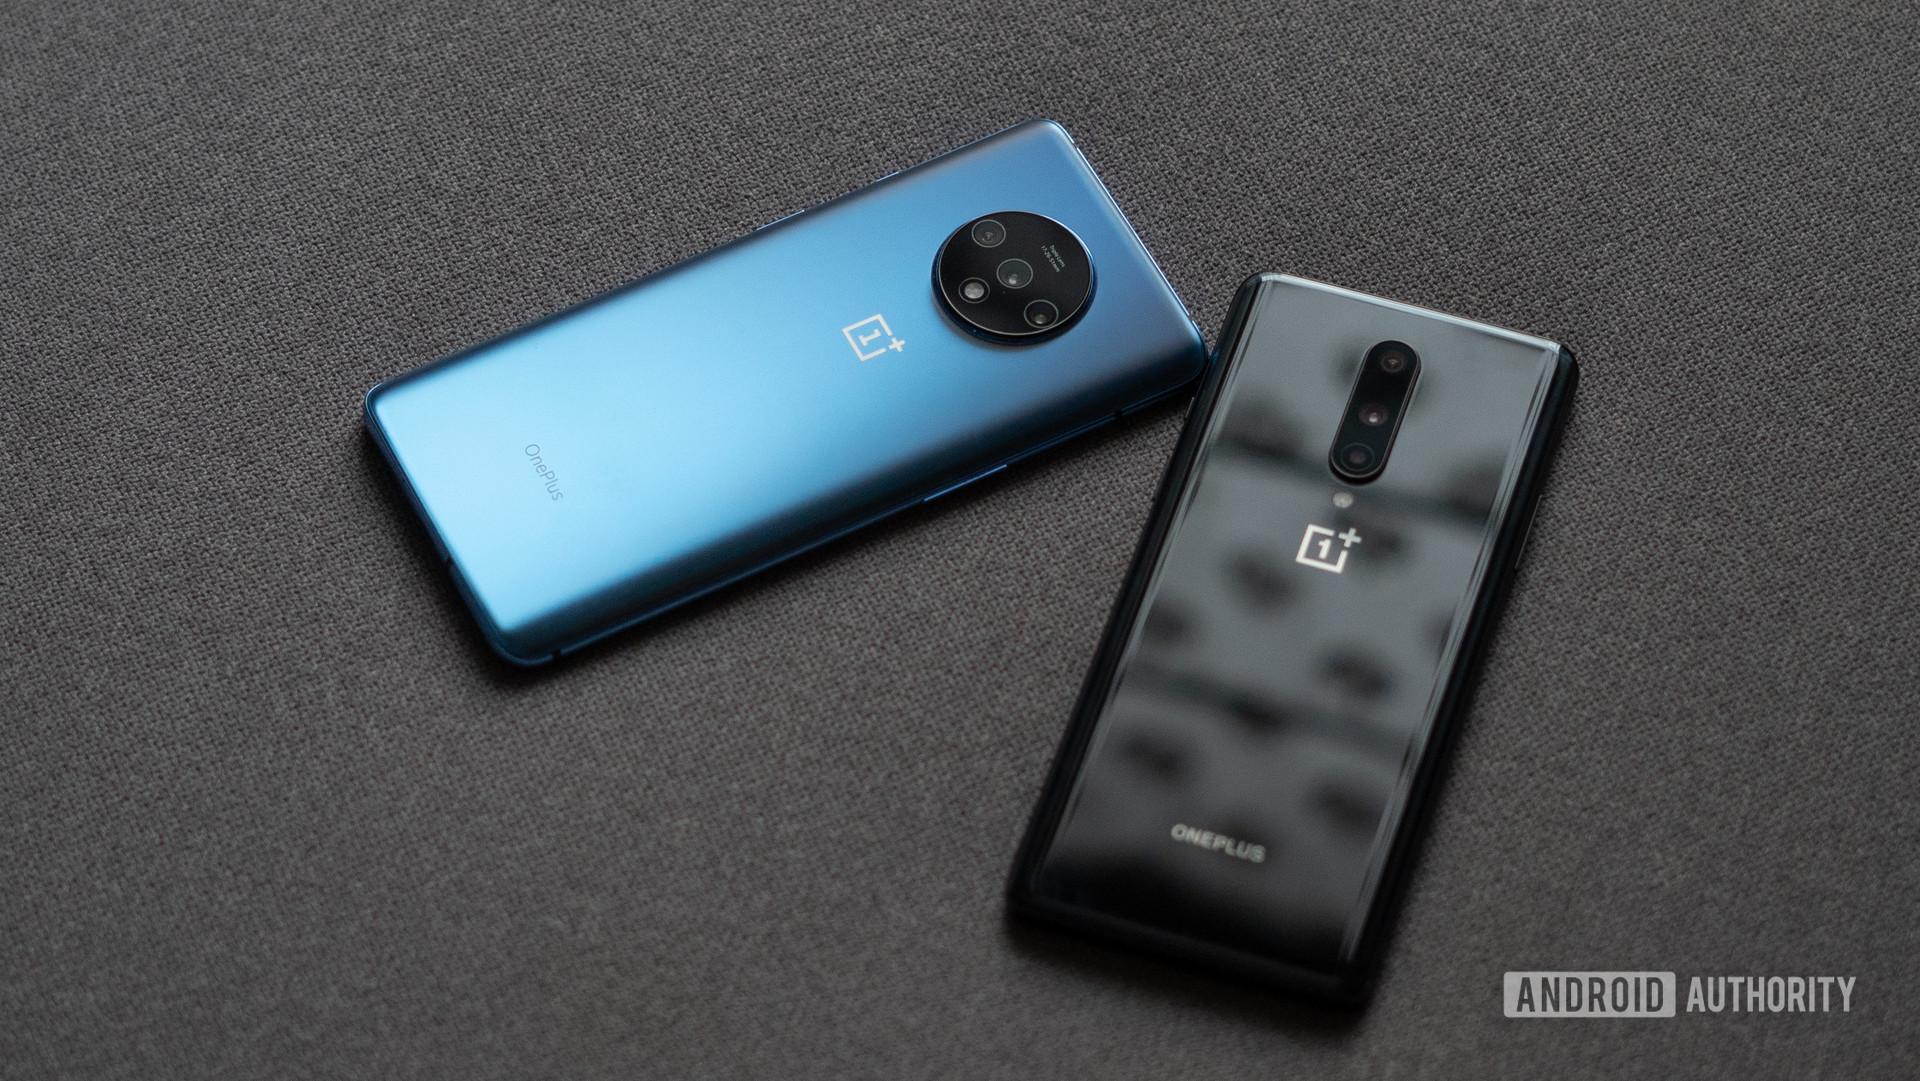 OnePlus 8T review: Not enough to stand out - Android Authority